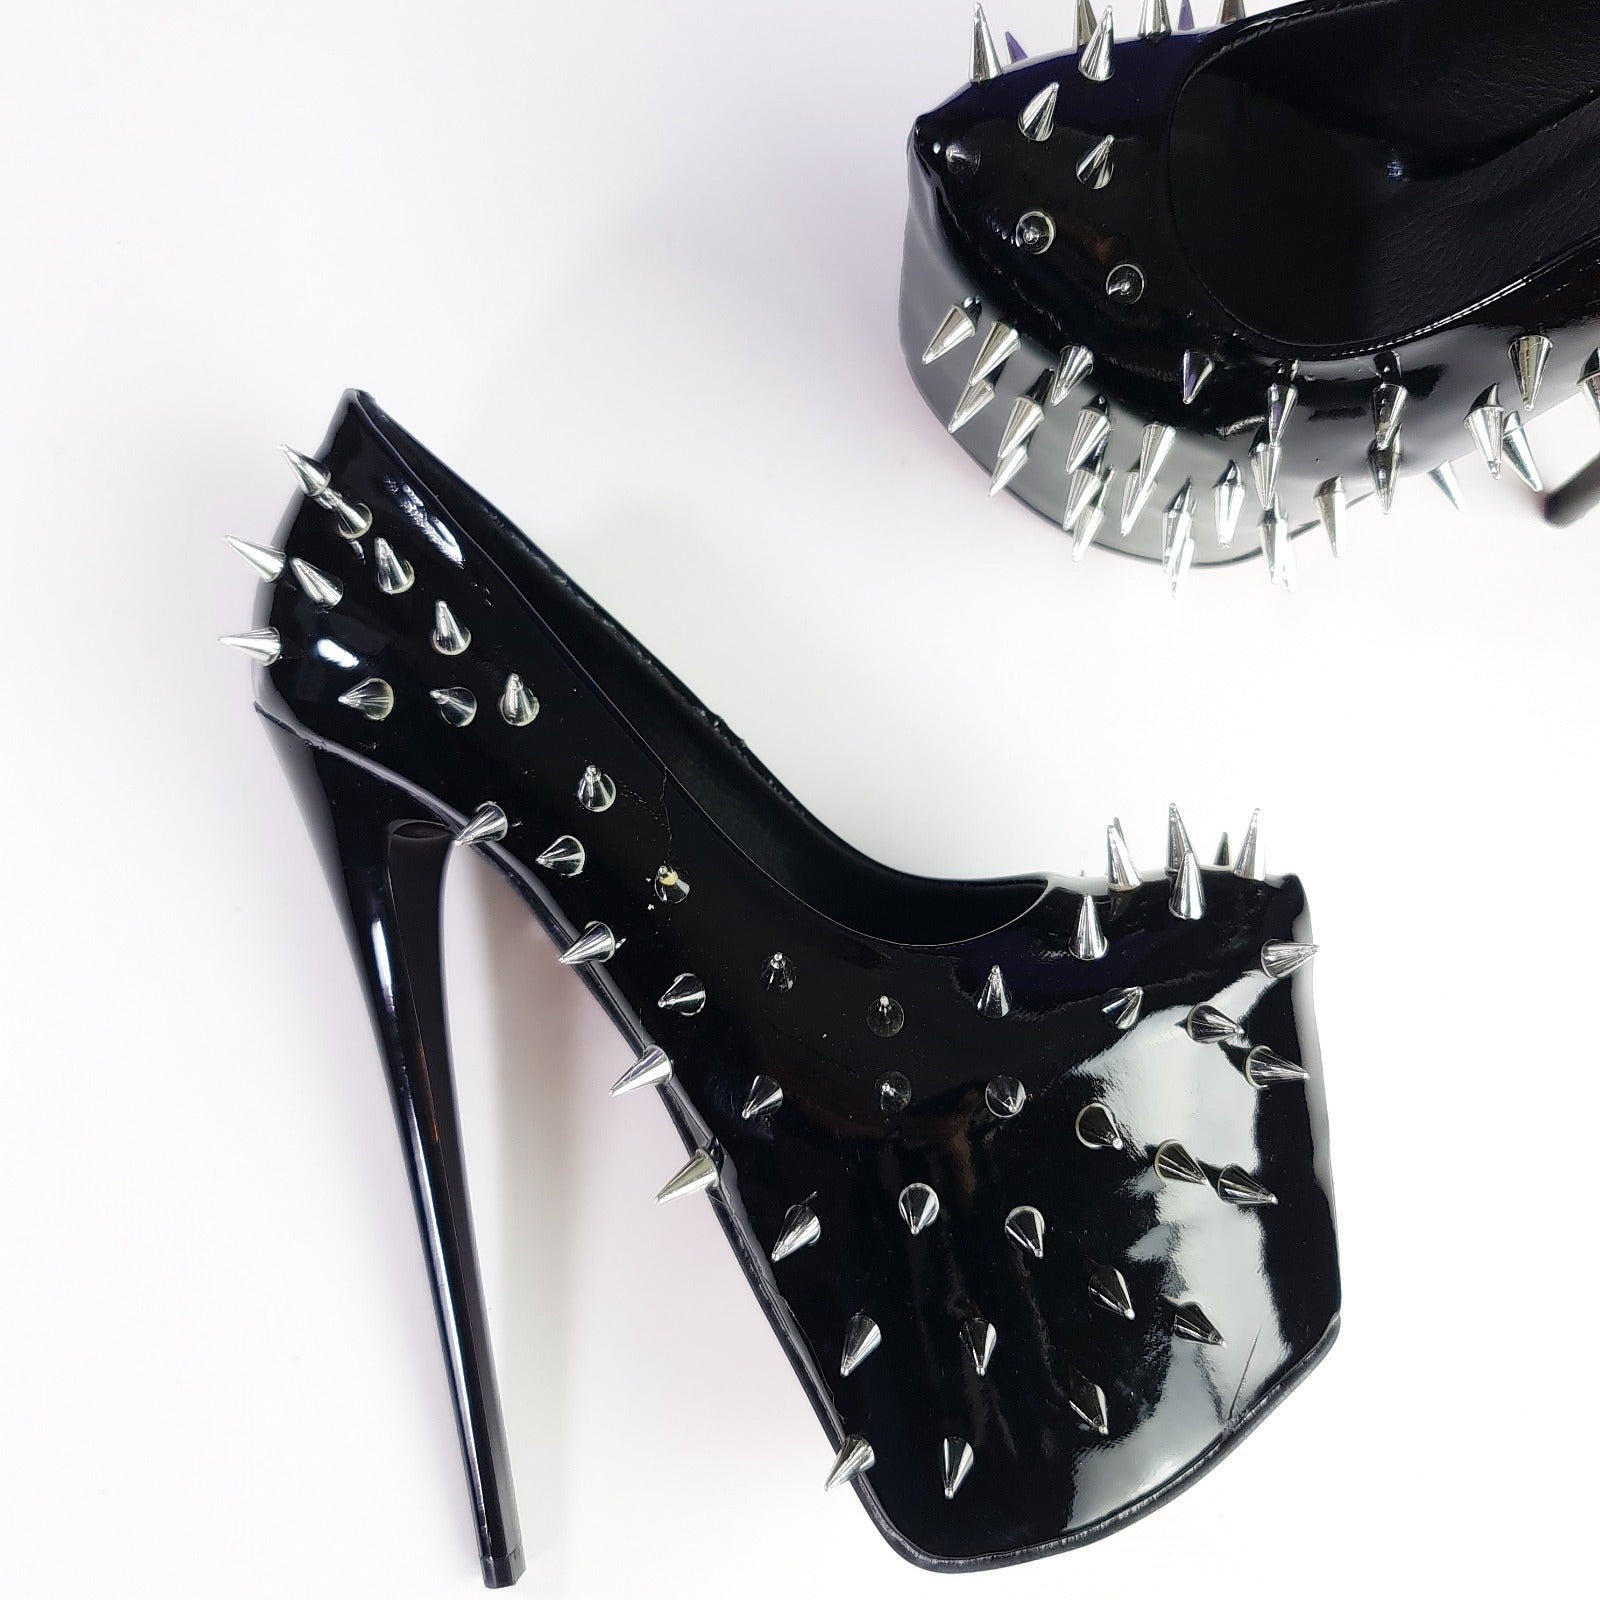 Shoes as Weapons: Sam Edelman Studded Pumps - Mj Wilson Photography -  Internationally published, Female Photographer for Fashion, Lifestyle,  Events, Weddings, Models, Actor Headshots